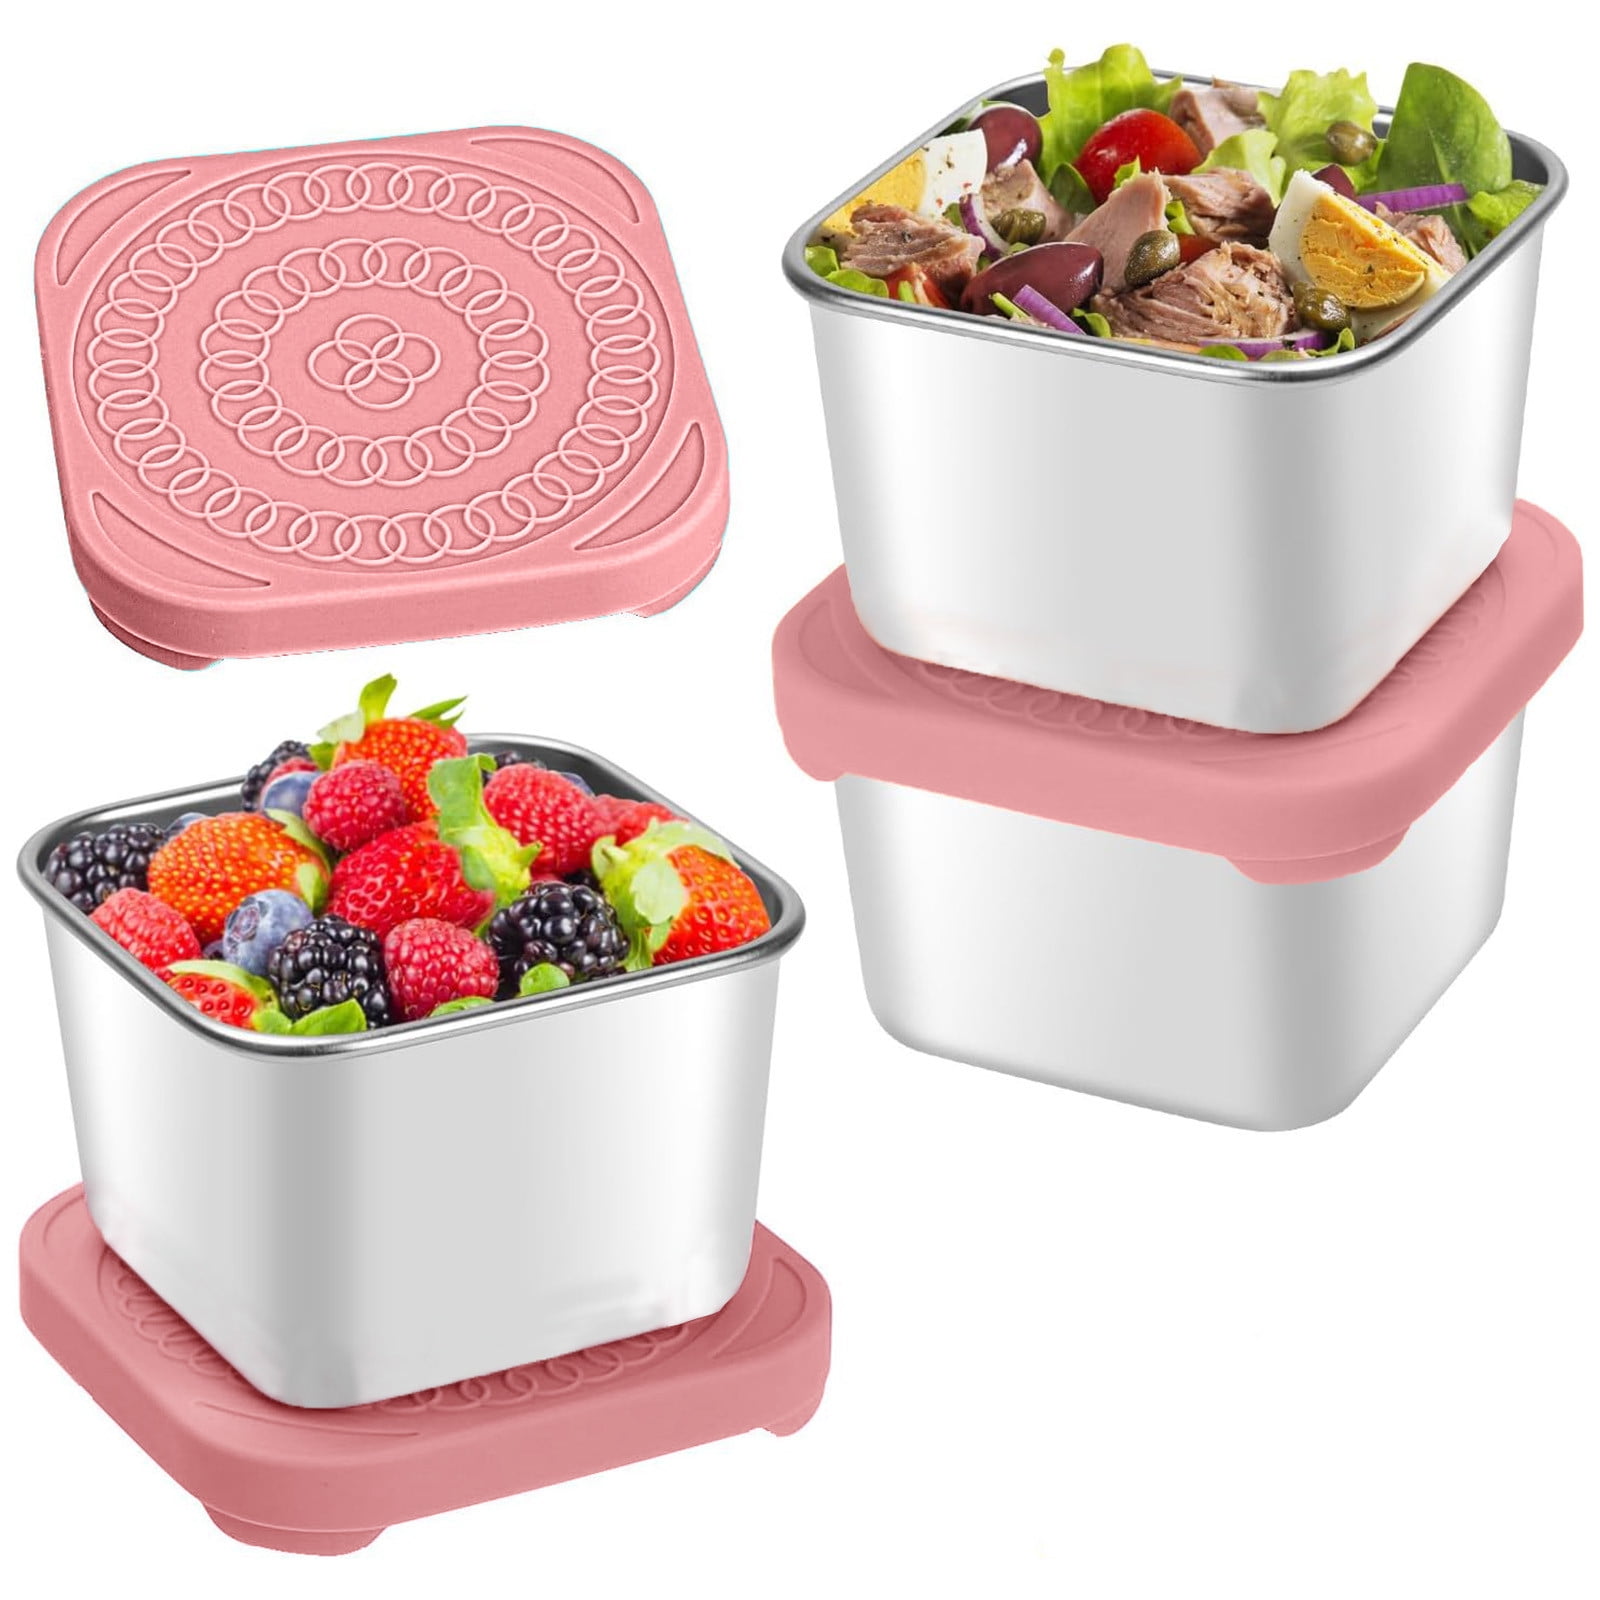  4 Oz. Small Containers with Lids [12 Pack] Small Snack  Containers with Twist Top Lids, Condiment Containers for Puree, Snacks,  and More